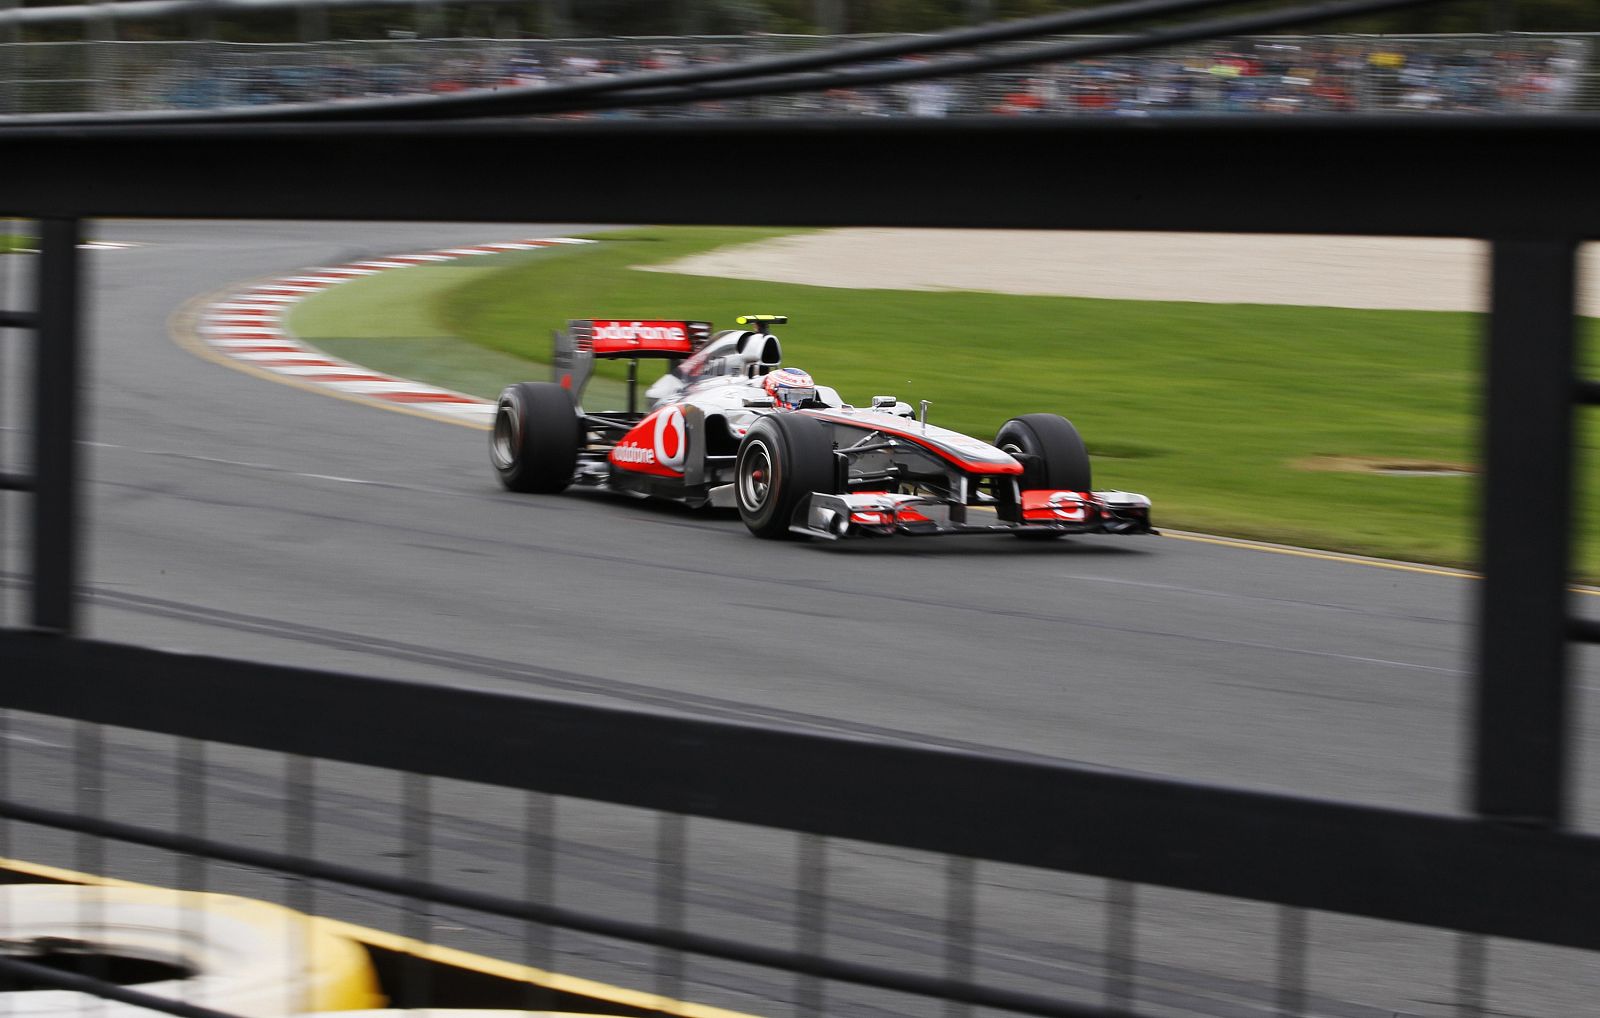 McLaren Formula One driver Button of Britain drives during the first practice session of the Australian F1 Grand Prix in Melbourne